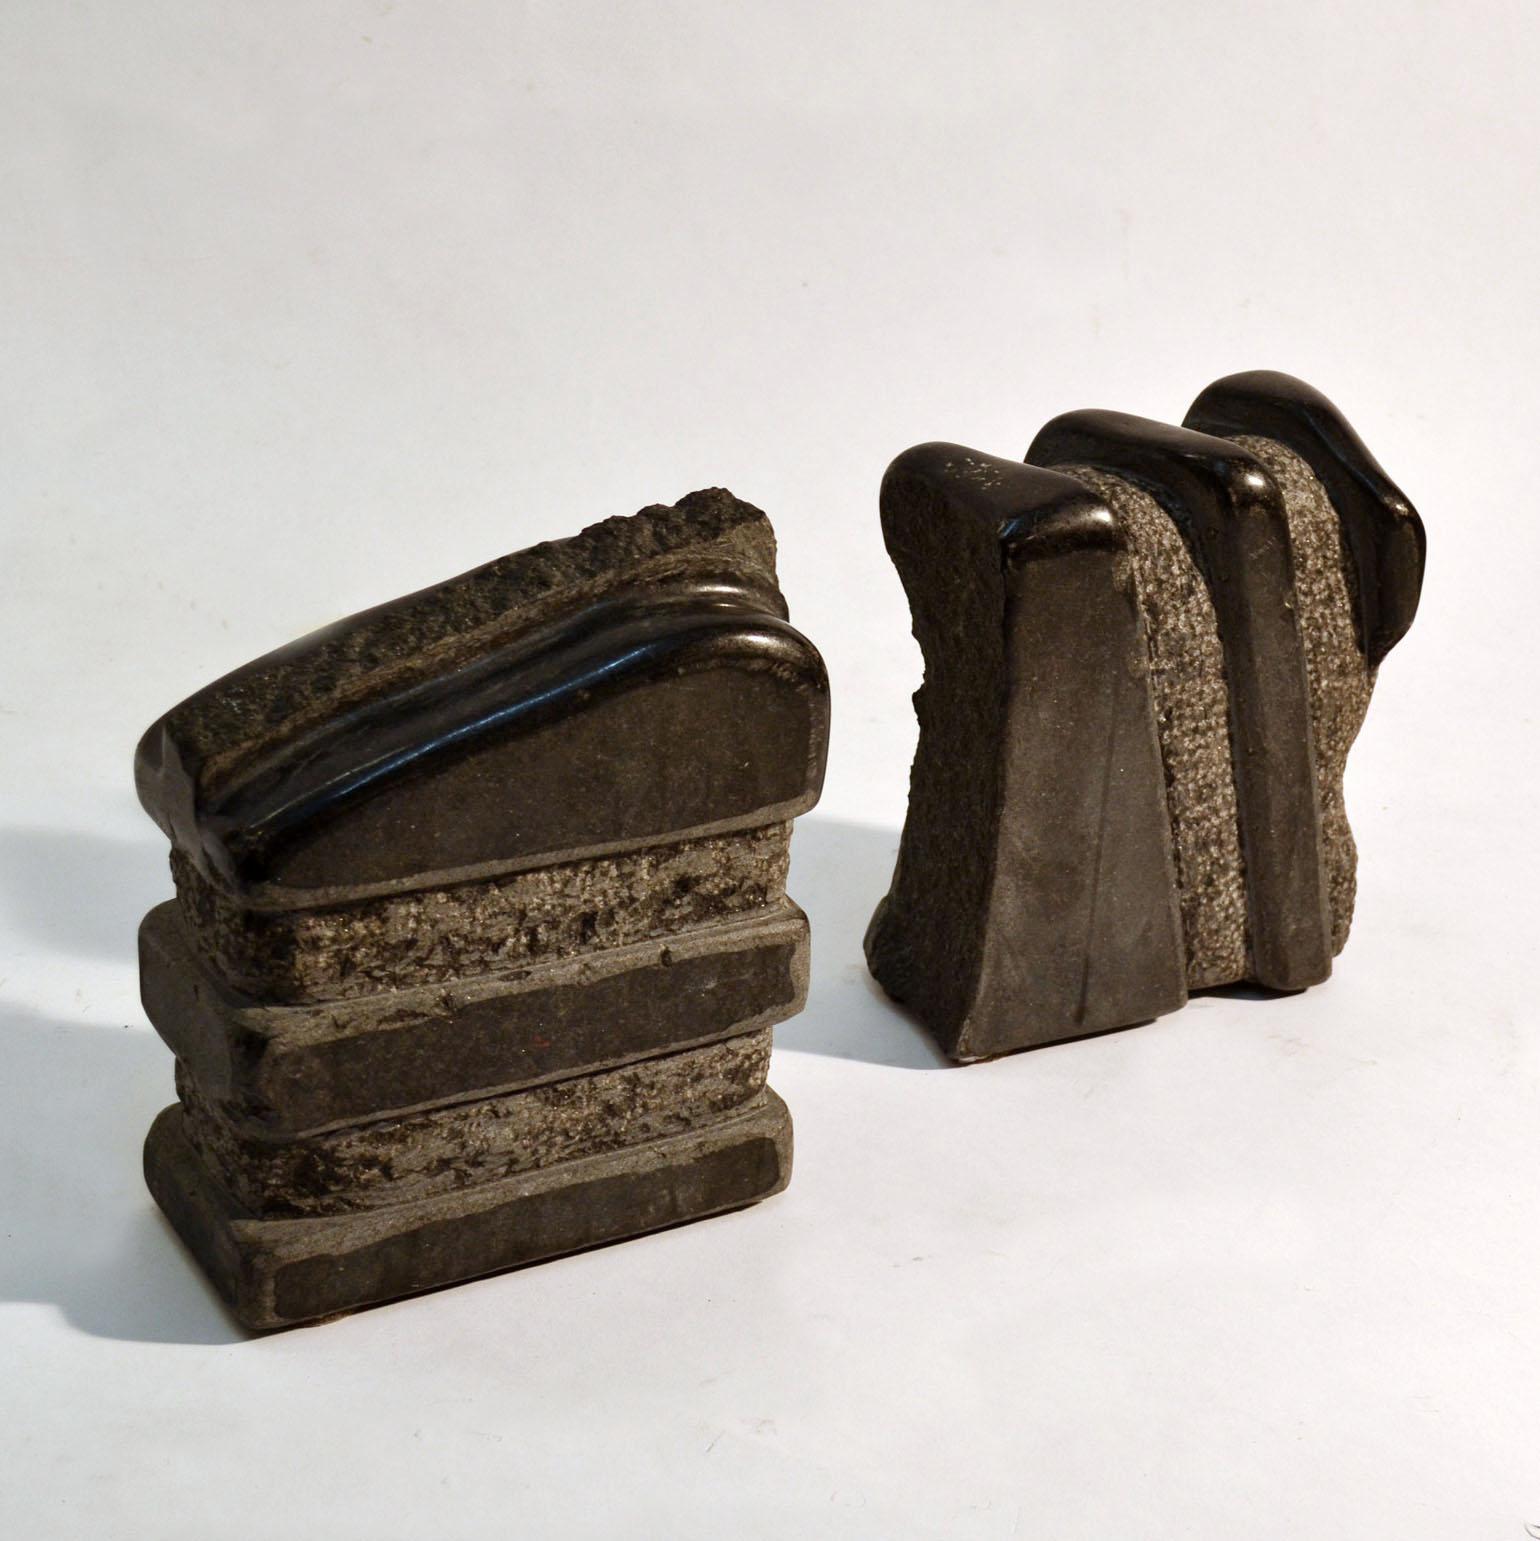 Two abstract hand-carved sculptures by the Dutch artist J. Metaho made in the 1970's. They are both composed in alternating sections of contrasting polished and textured stone. Sculpture No. 5 has a horizontal composition and No. 7 is based on a